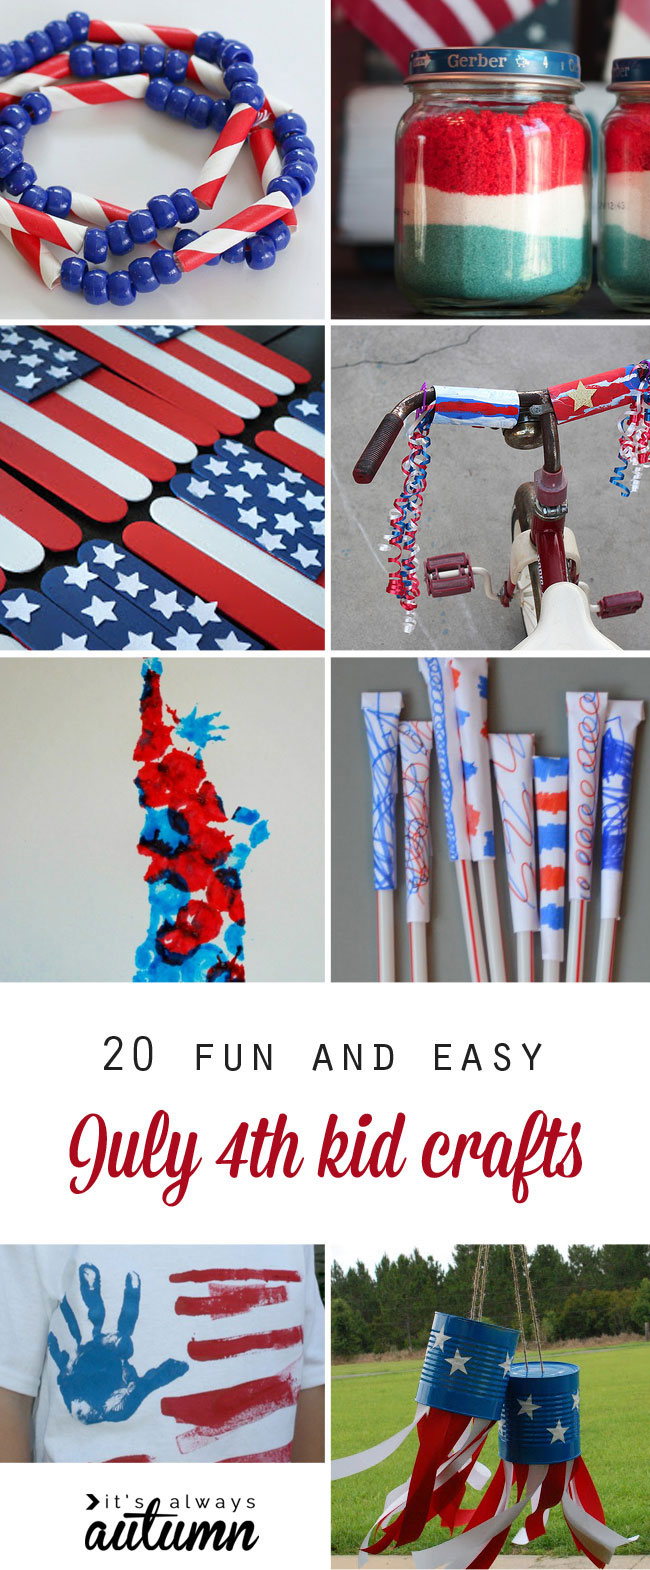 Collage of easy 4th of July crafts for kids